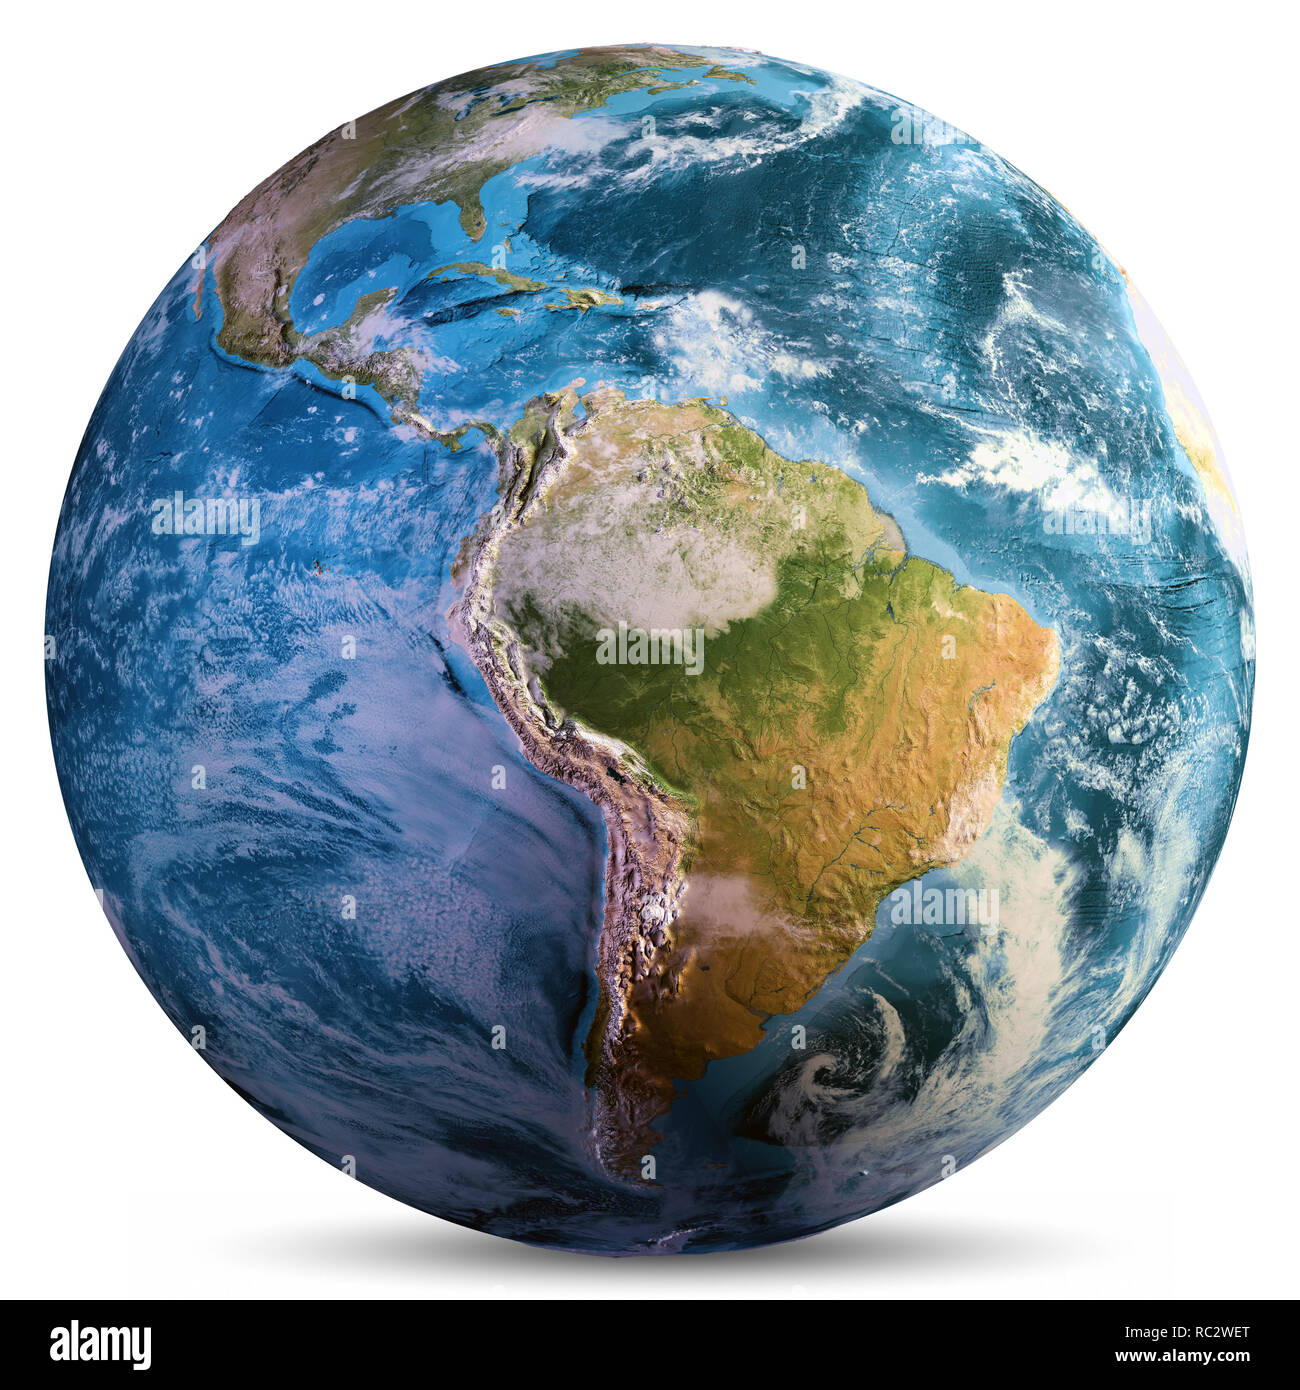 Planet Earth continents Stock Photo